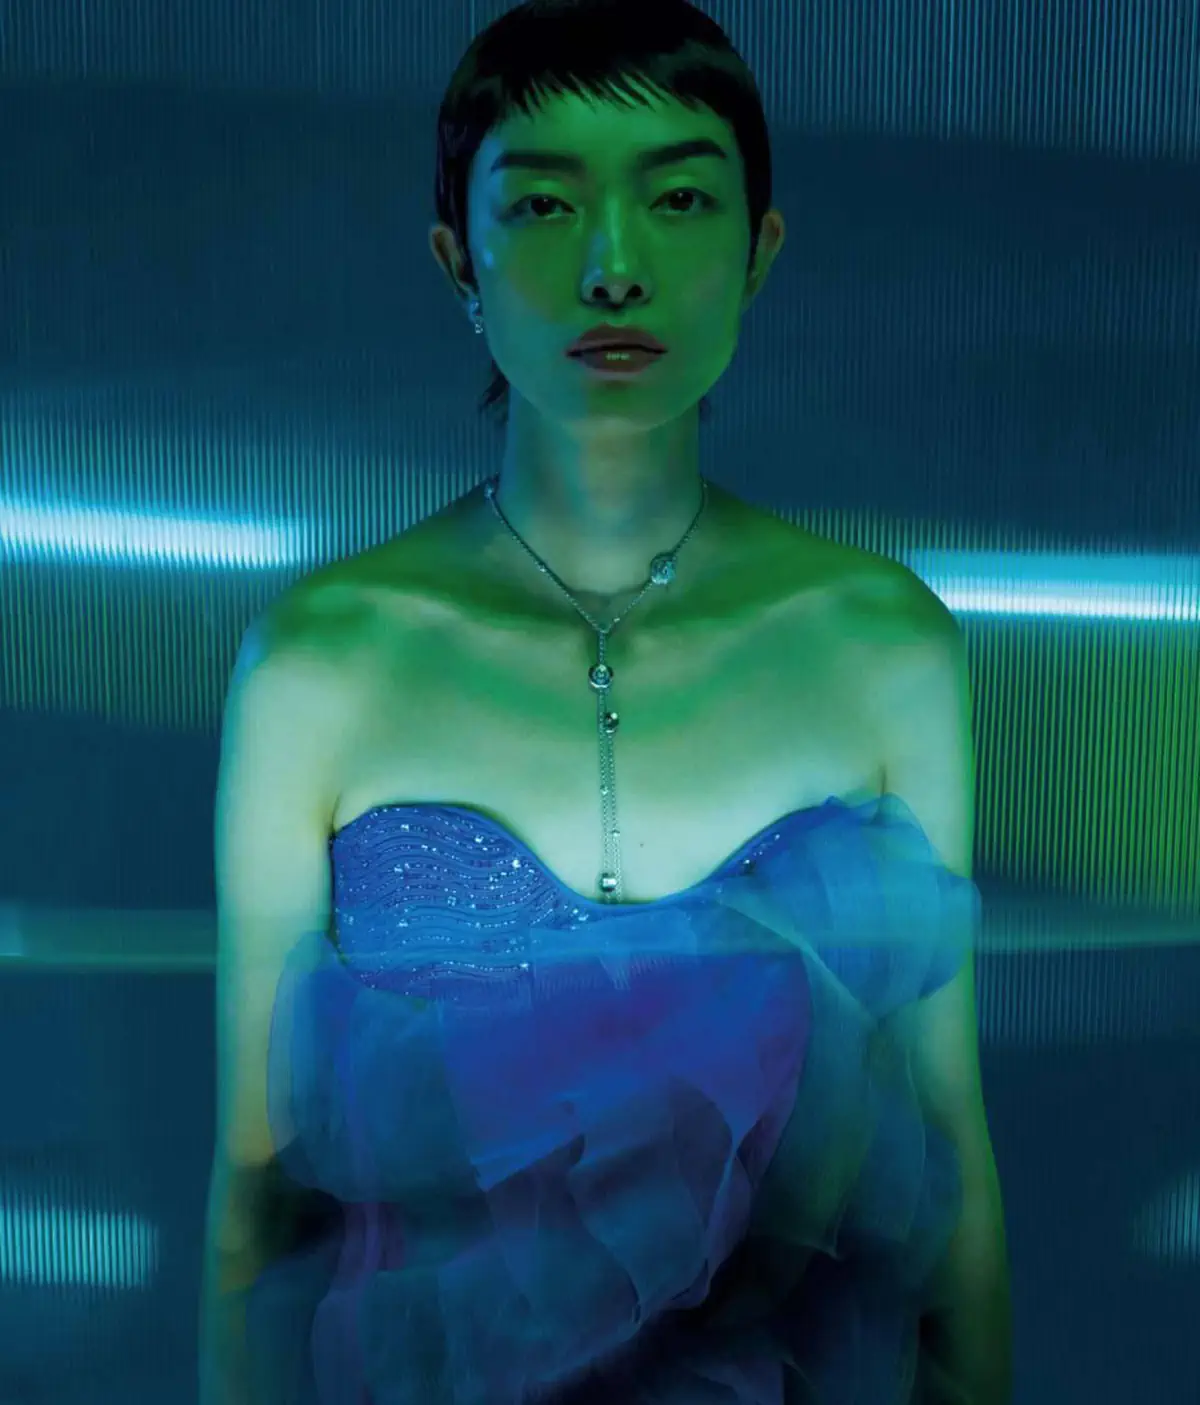 Fei Fei Sun in Tiffany & Co. on D la Repubblica January 27th, 2024 cover by Ethan James Green